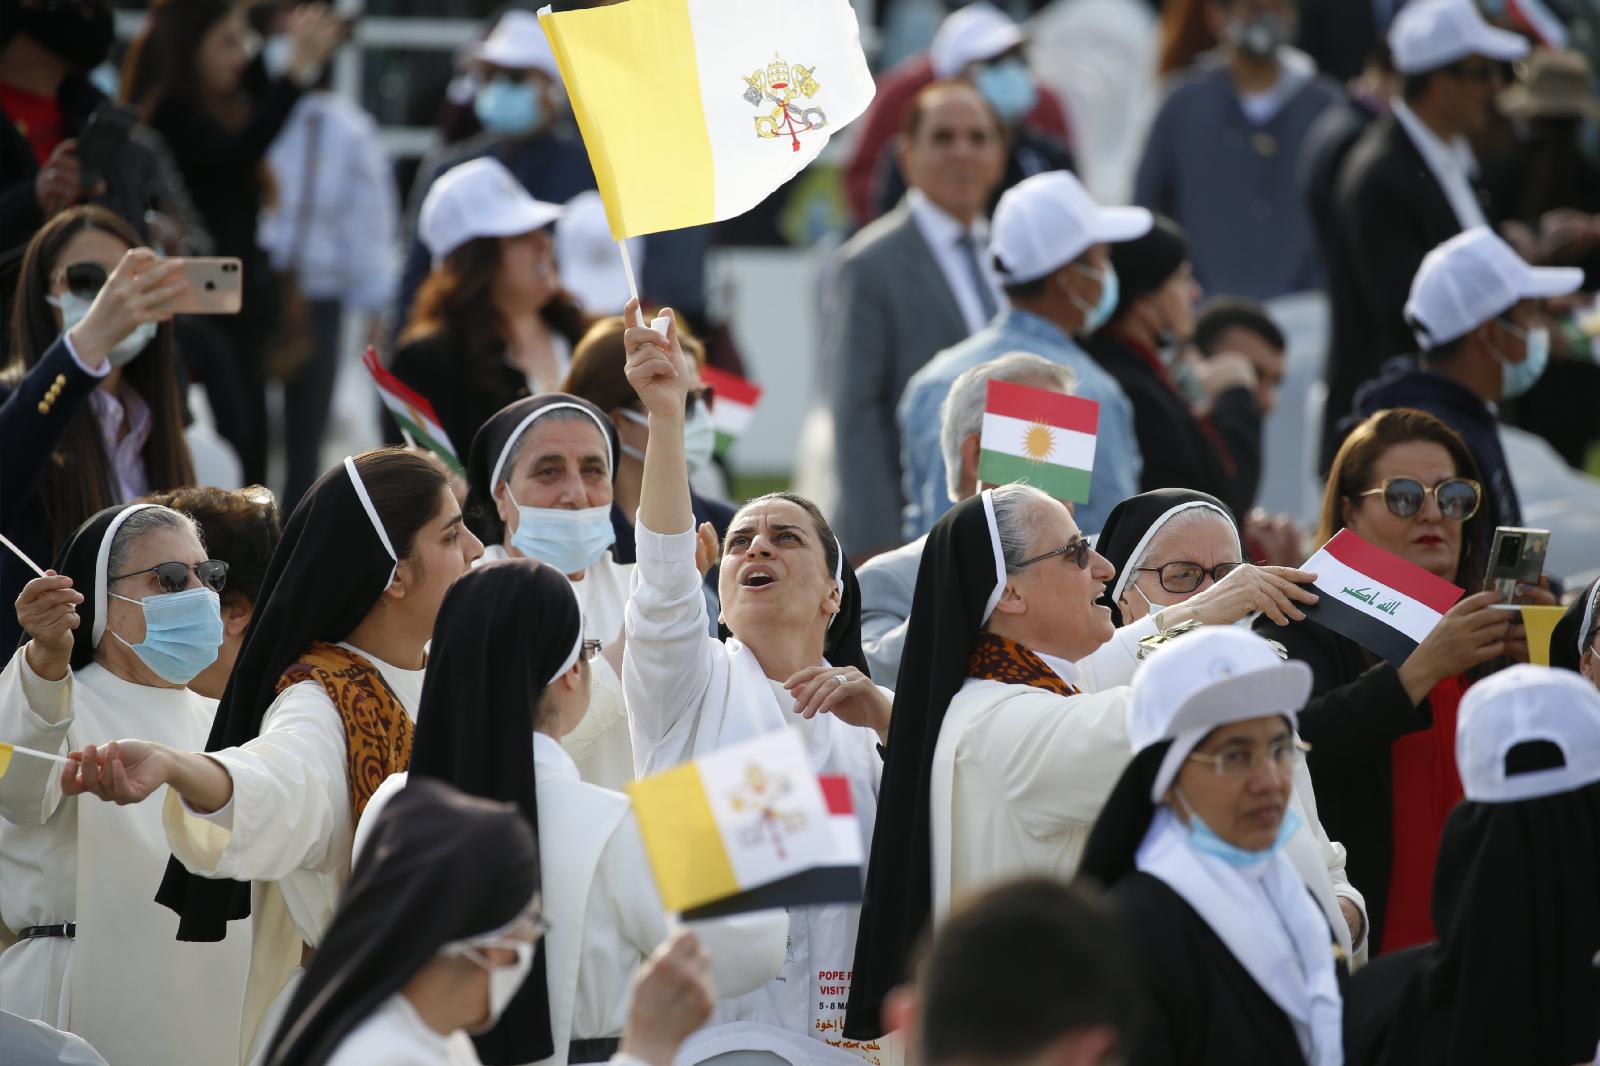 Cleanse hearts of anger, says Pope in Iraq